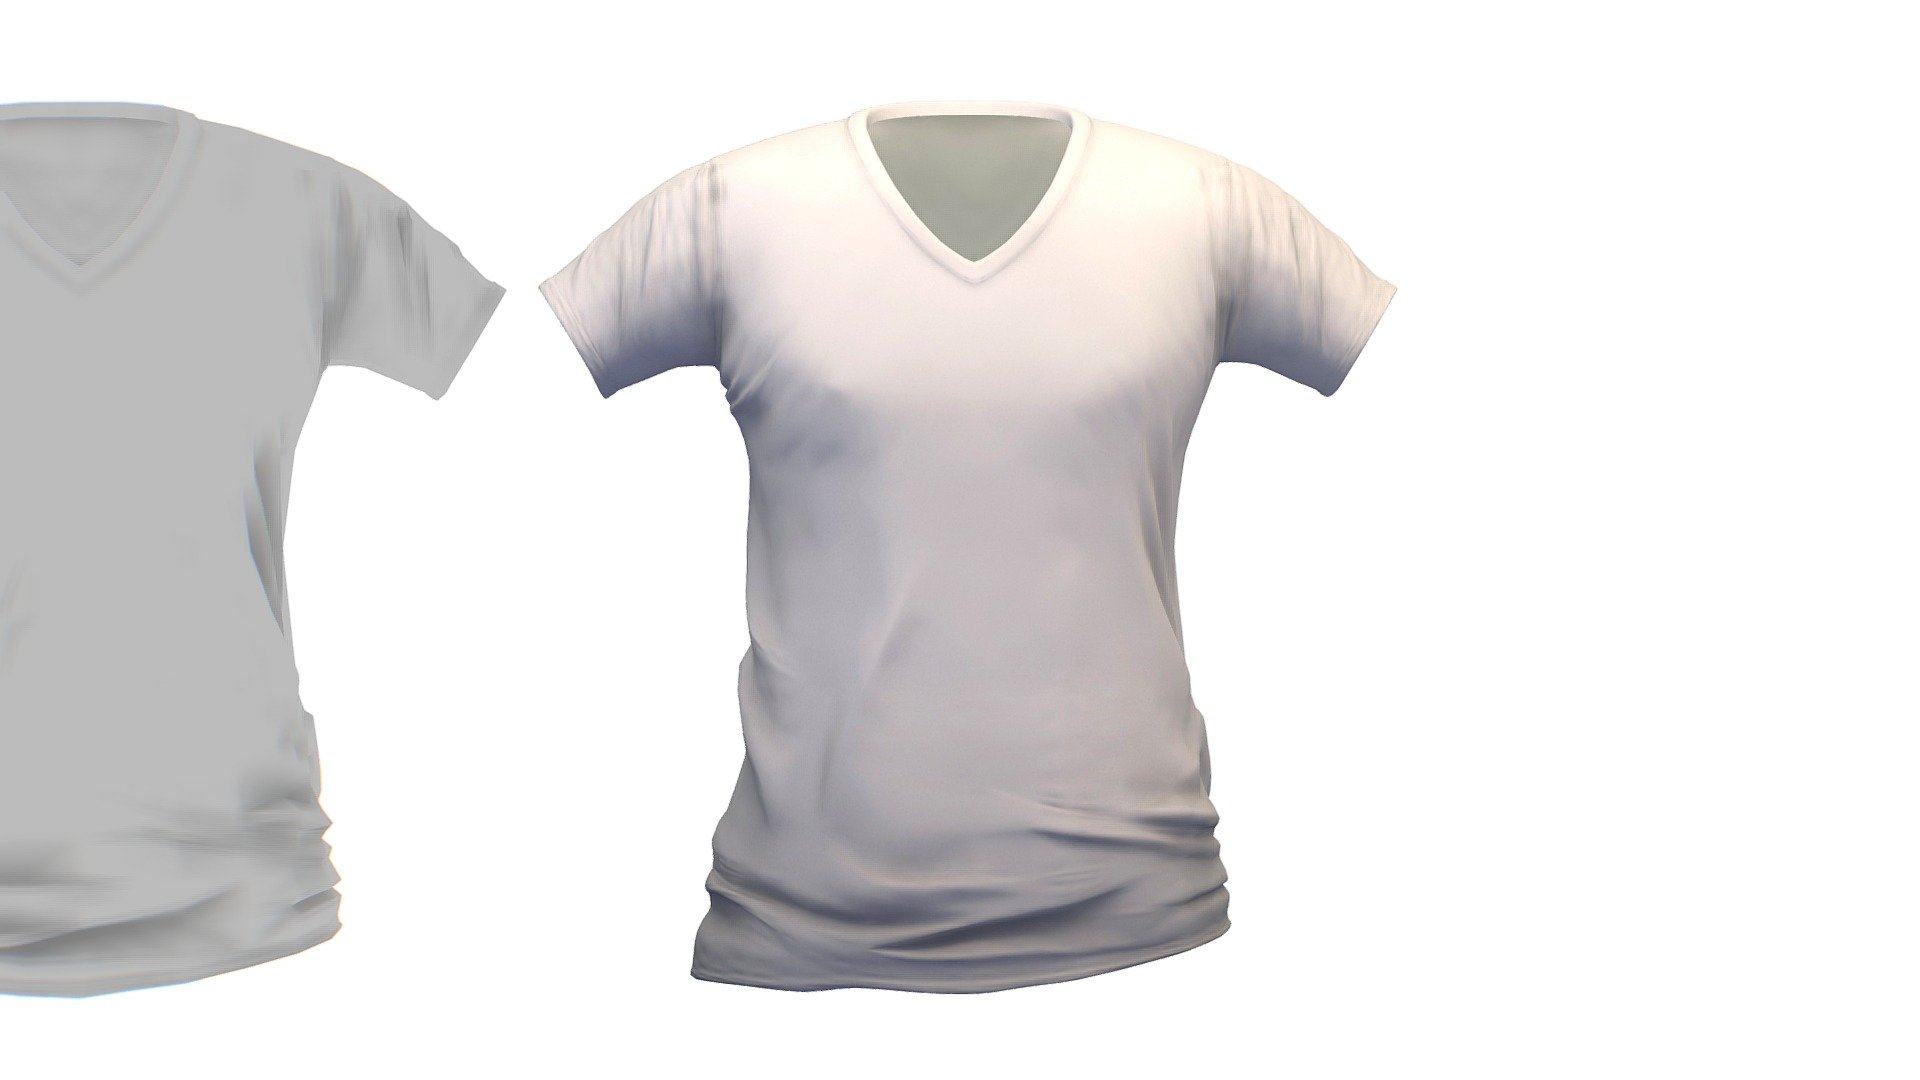 Cartoon High Poly Subdivision White T-shirt

No HDRI map, No Light, No material settings - only Diffuse/Color Map Texture (2500Х2500) 

More information about the 3D model: please use the Sketchfab Model Inspector - Key (i) - Cartoon High Poly Subdivision White T-shirt - Buy Royalty Free 3D model by Oleg Shuldiakov (@olegshuldiakov) 3d model